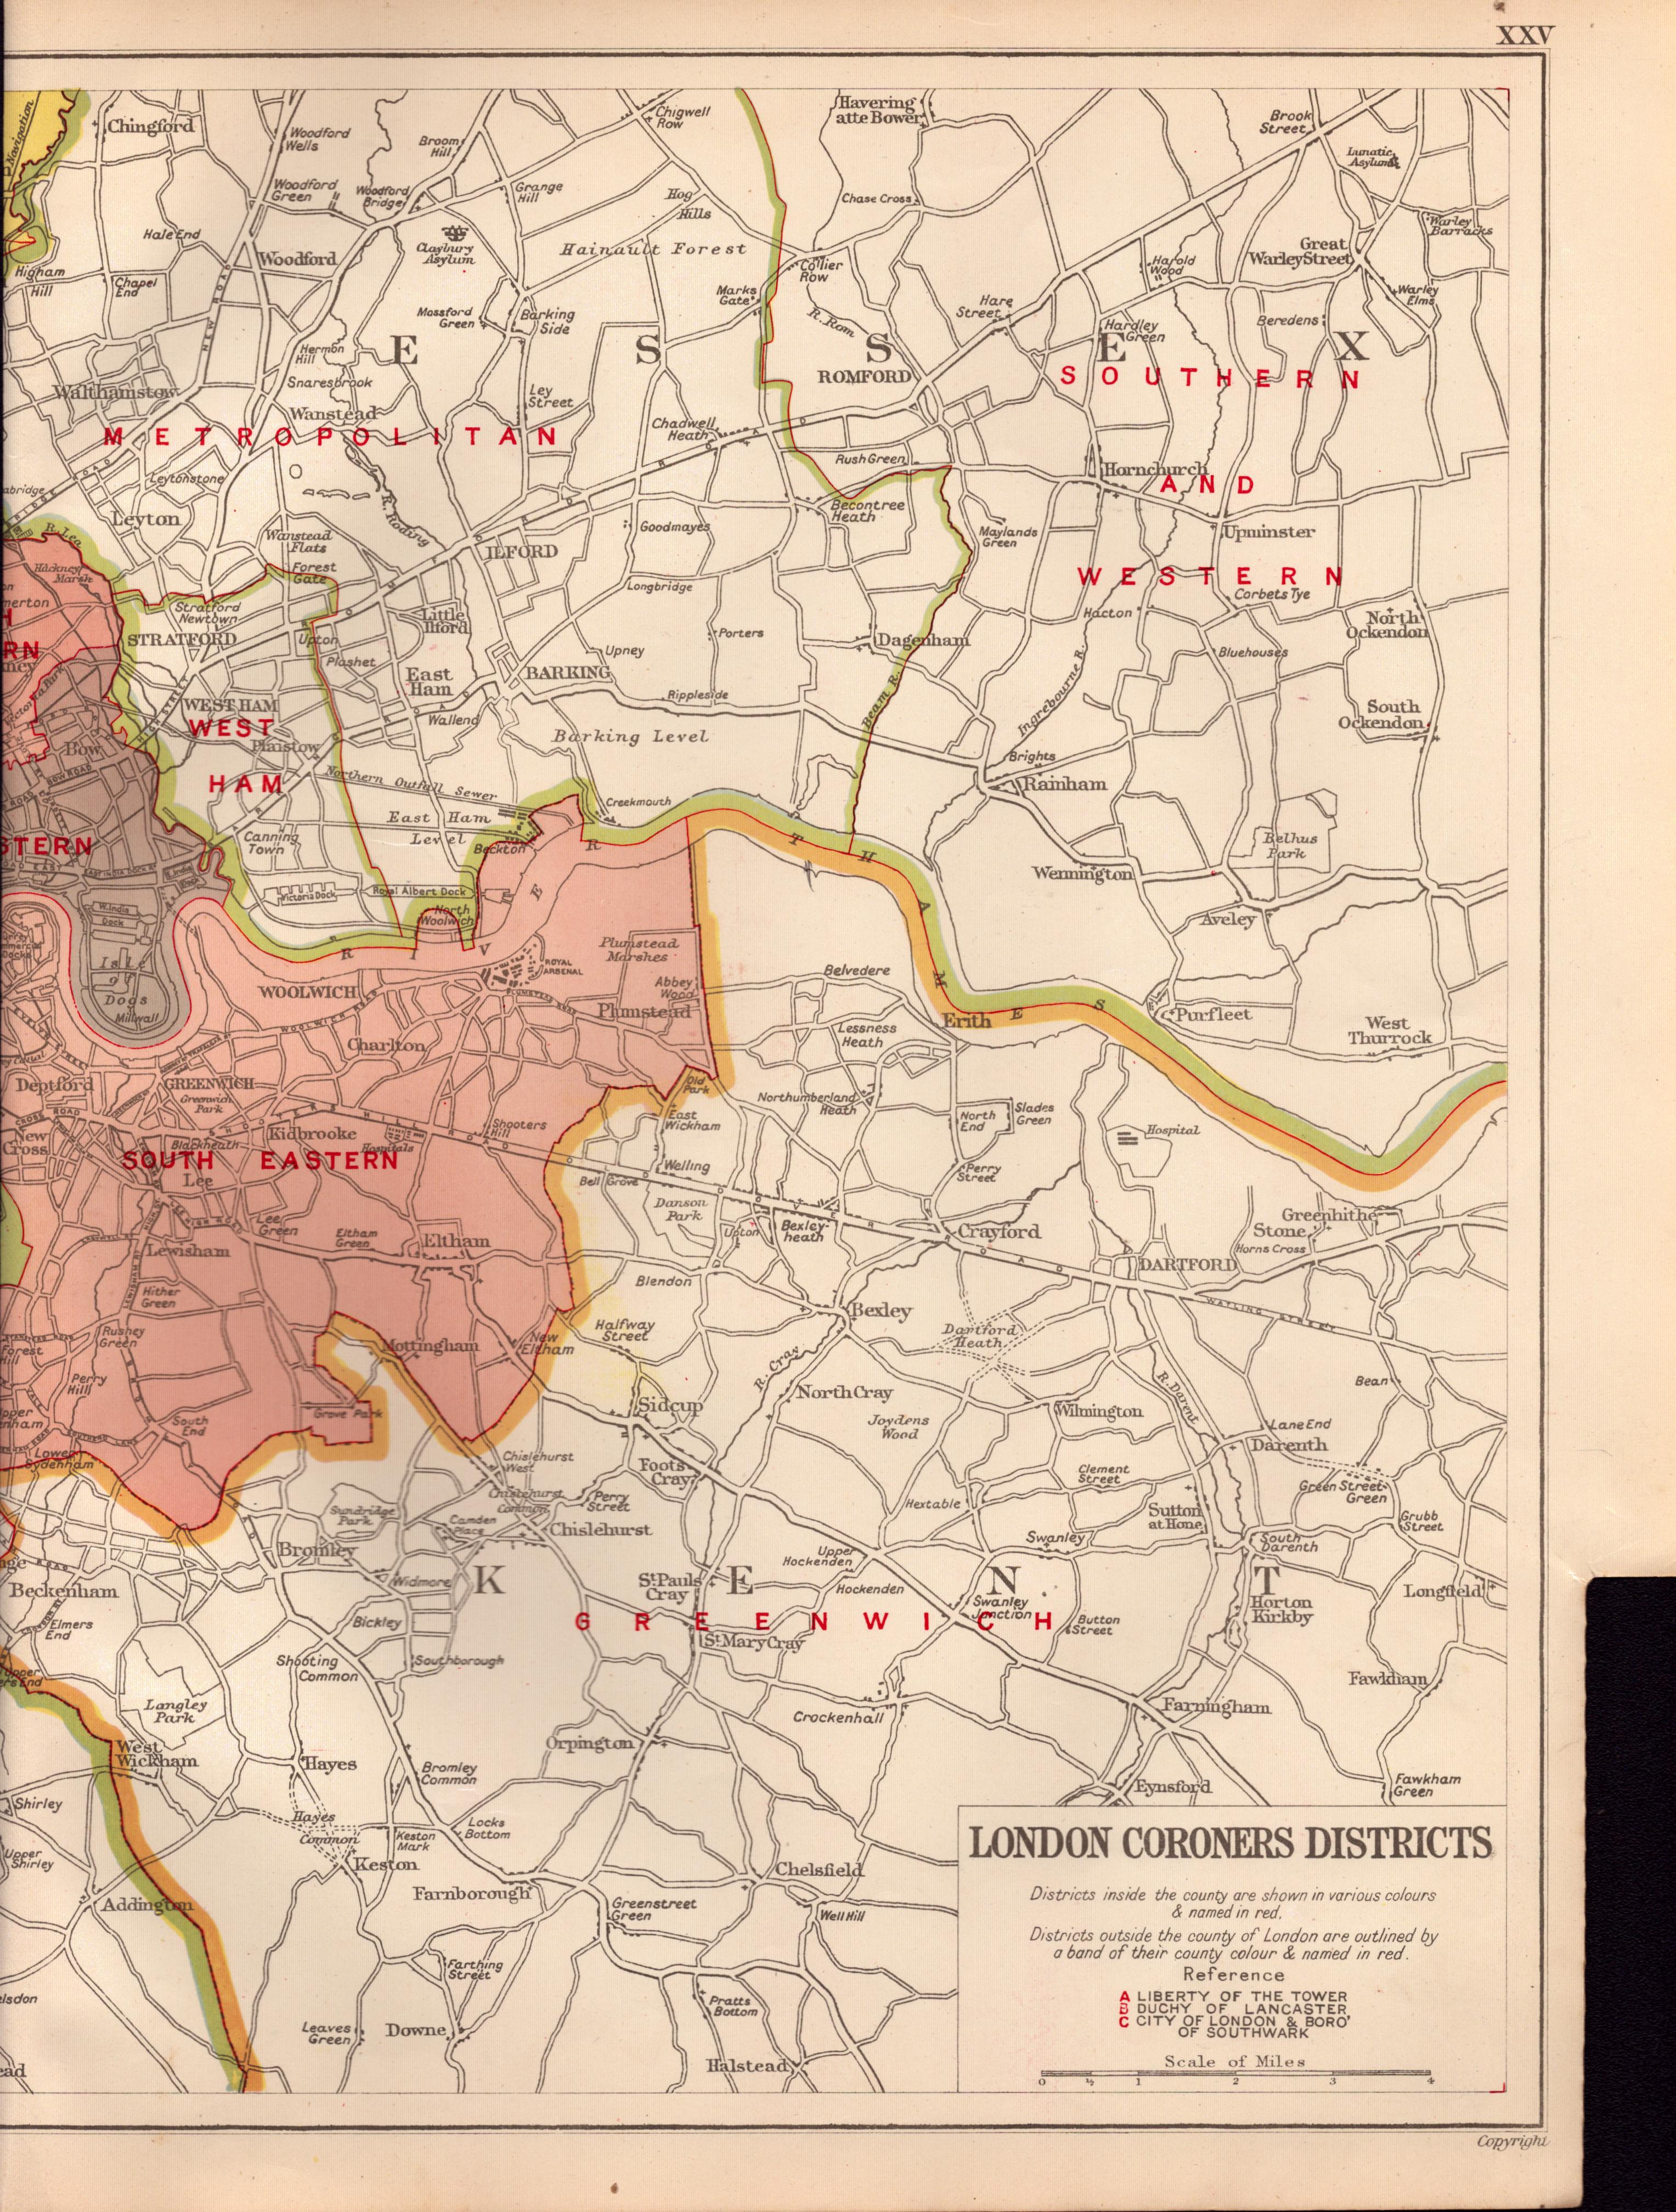 Bacons Vintage London Suburbs Coroners Districts Detailed Map. - Image 3 of 4